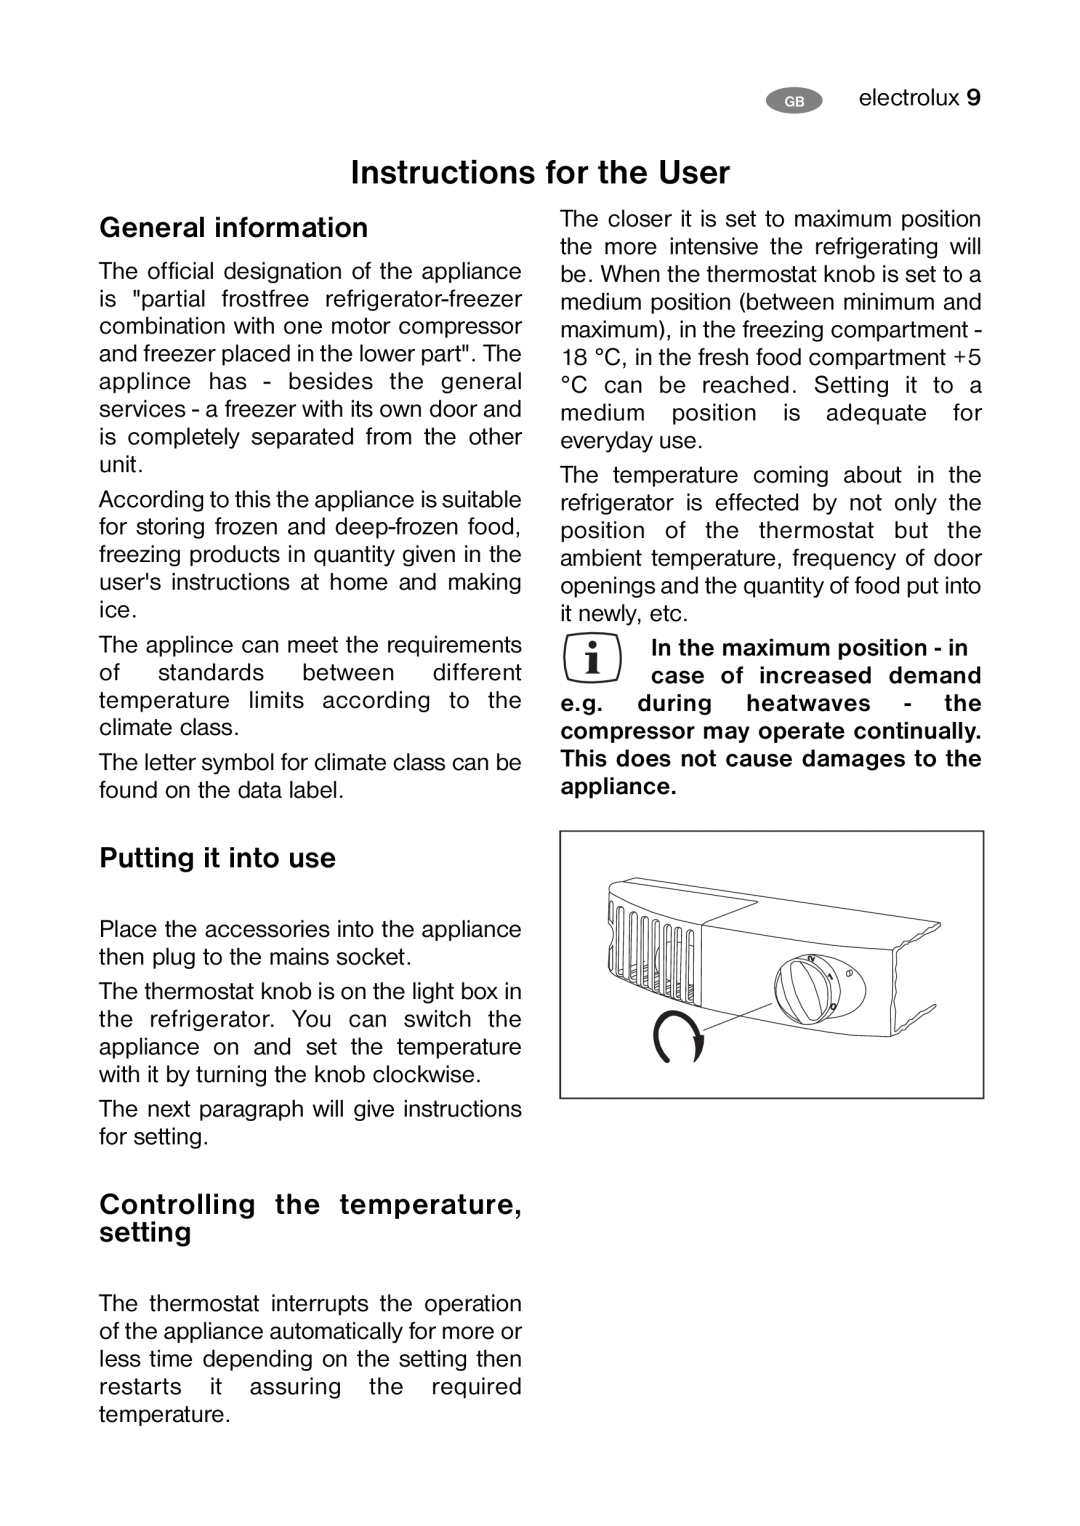 Electrolux ENB32000W user manual Instructions for the User, General information, Putting it into use 